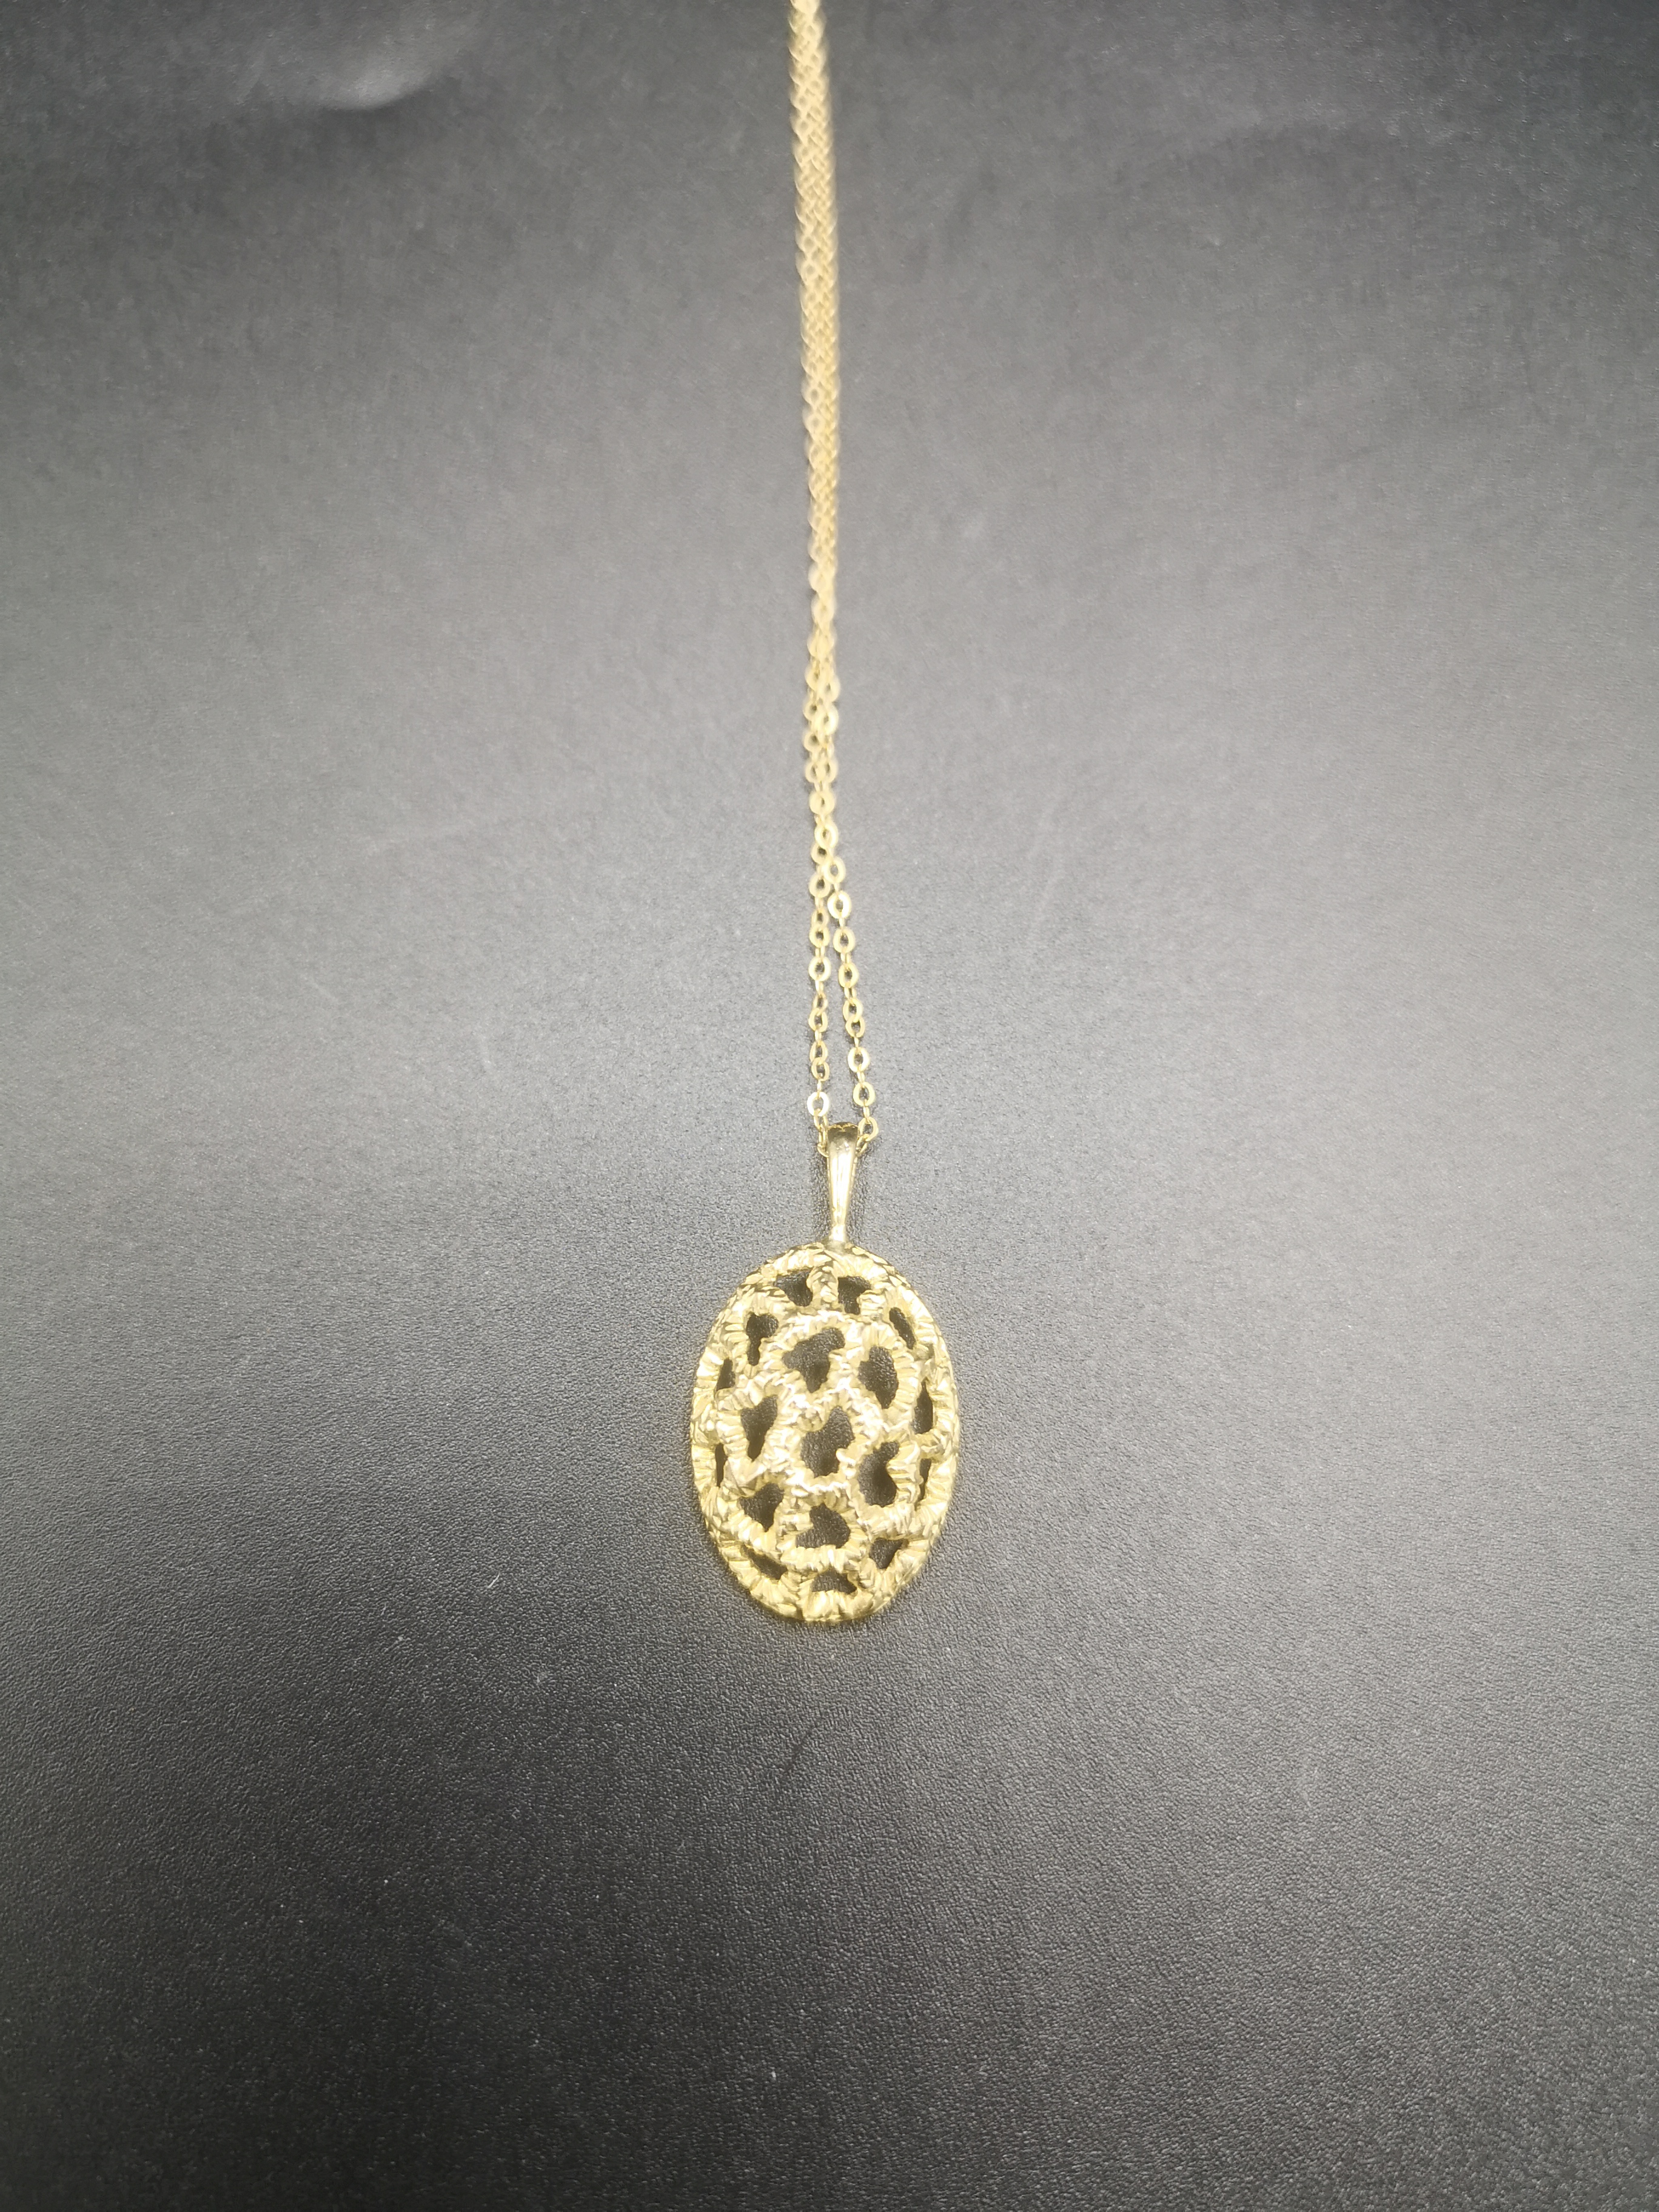 9ct gold necklace and pendant - Image 3 of 6